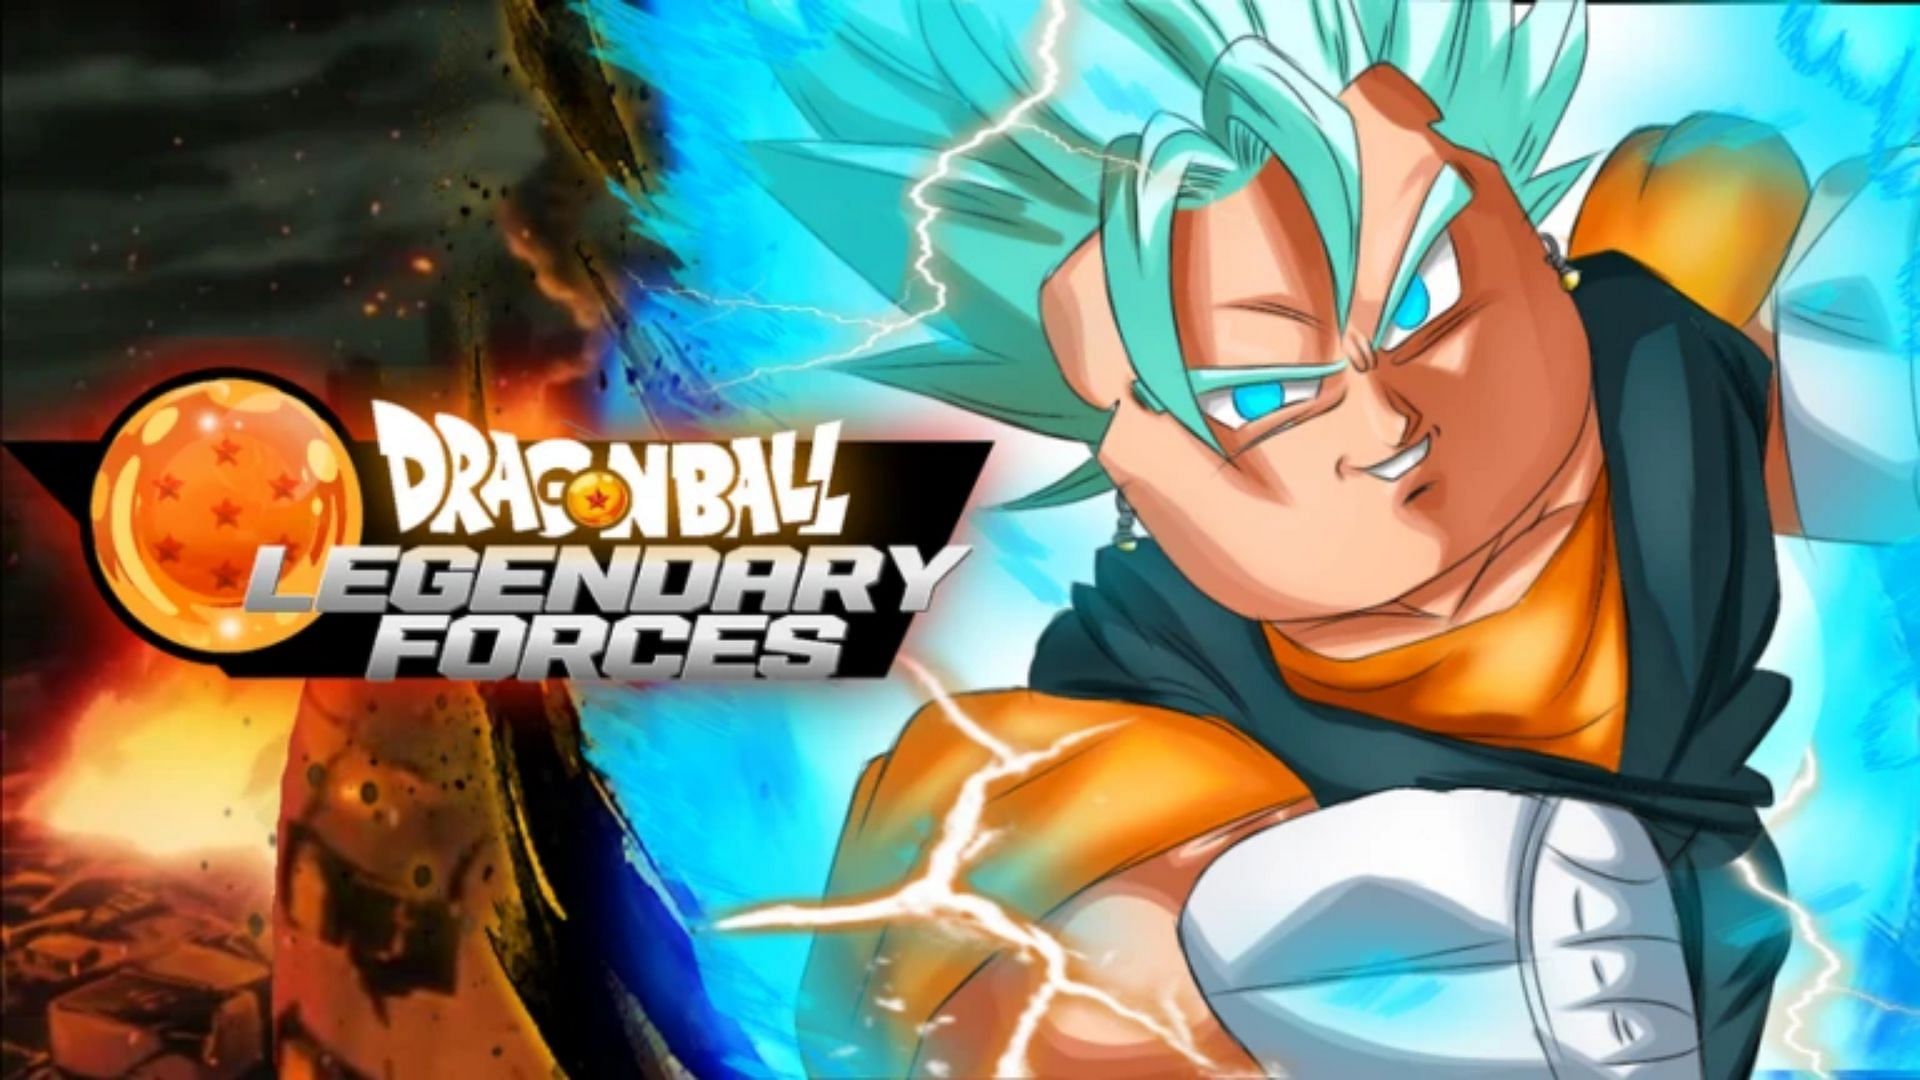 Codes for Dragon Ball Legendary Forces and their importance (Image via Roblox)